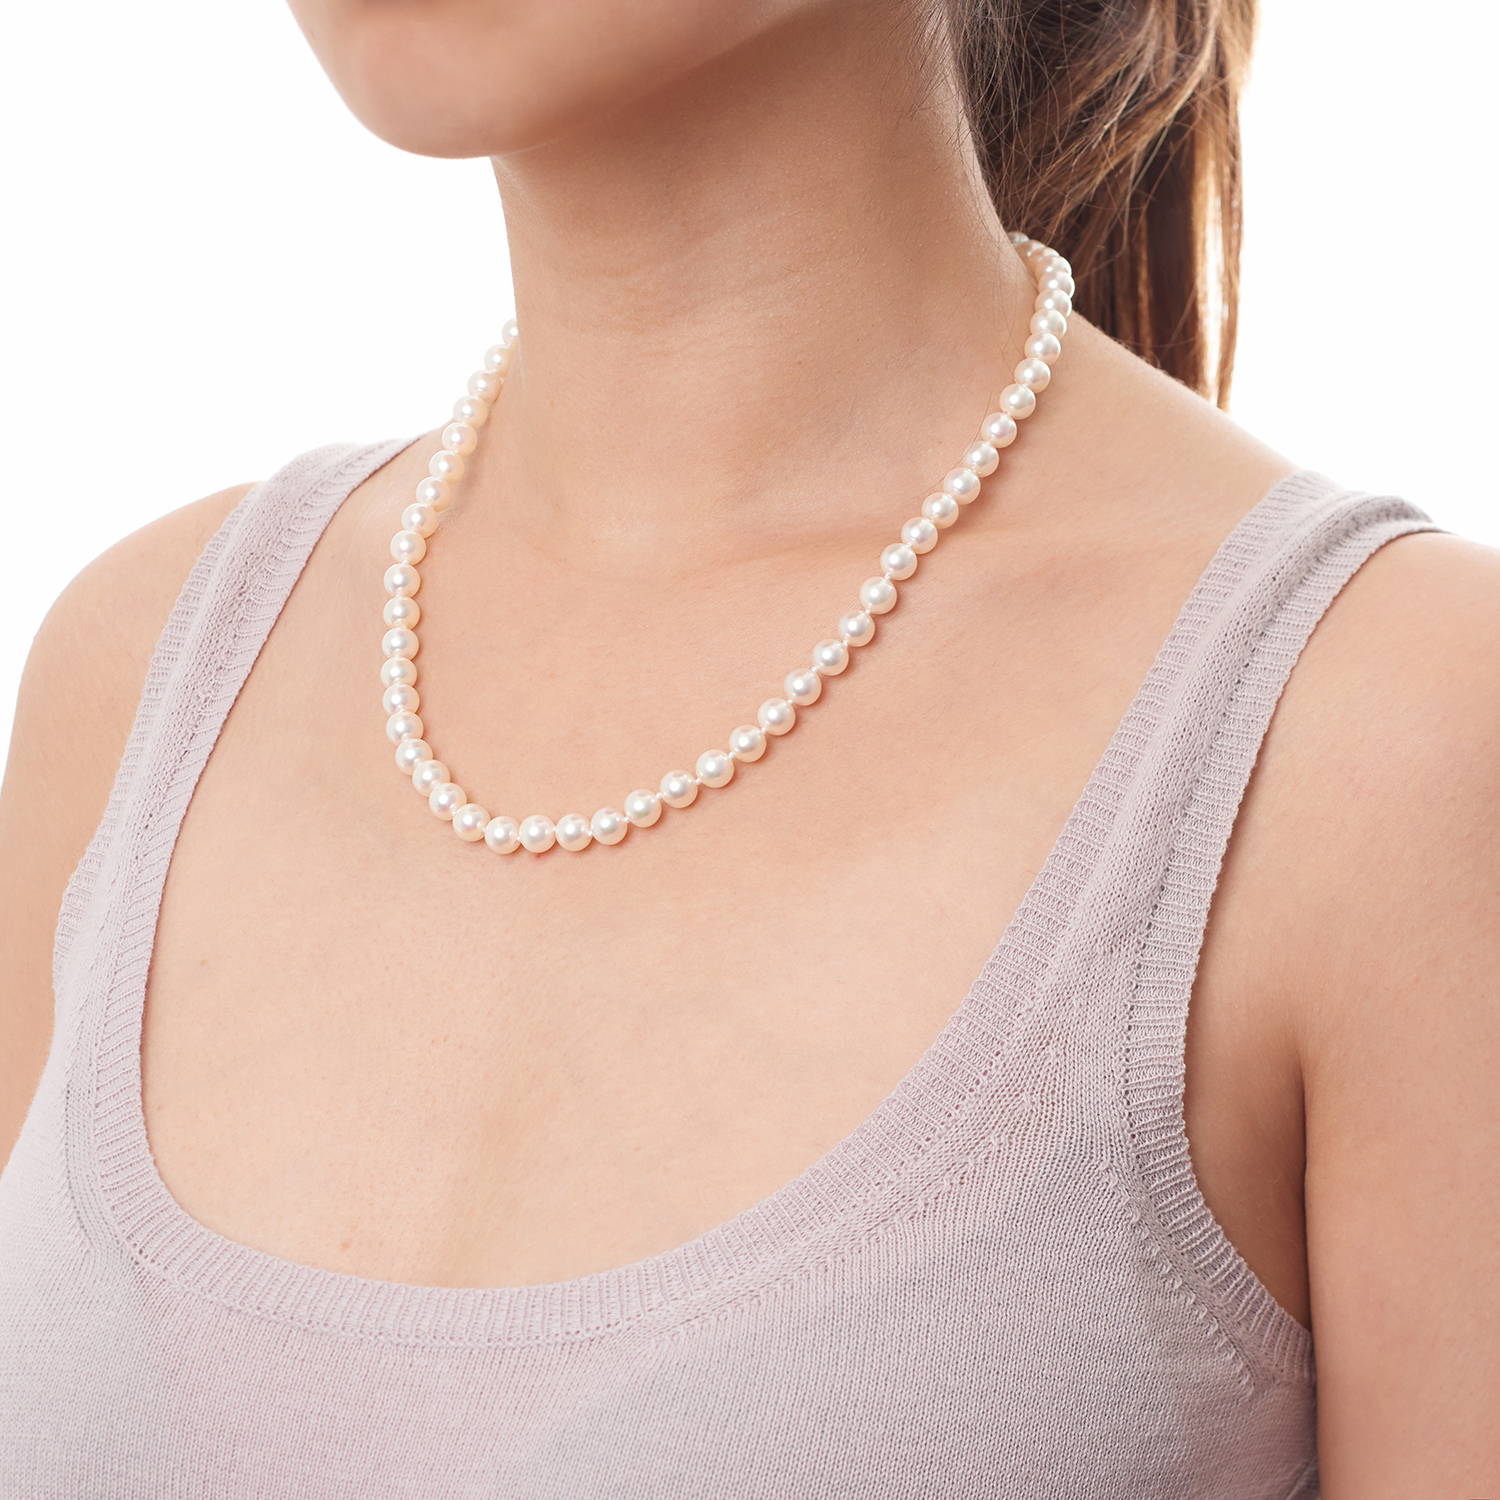 Getting a pearl necklace